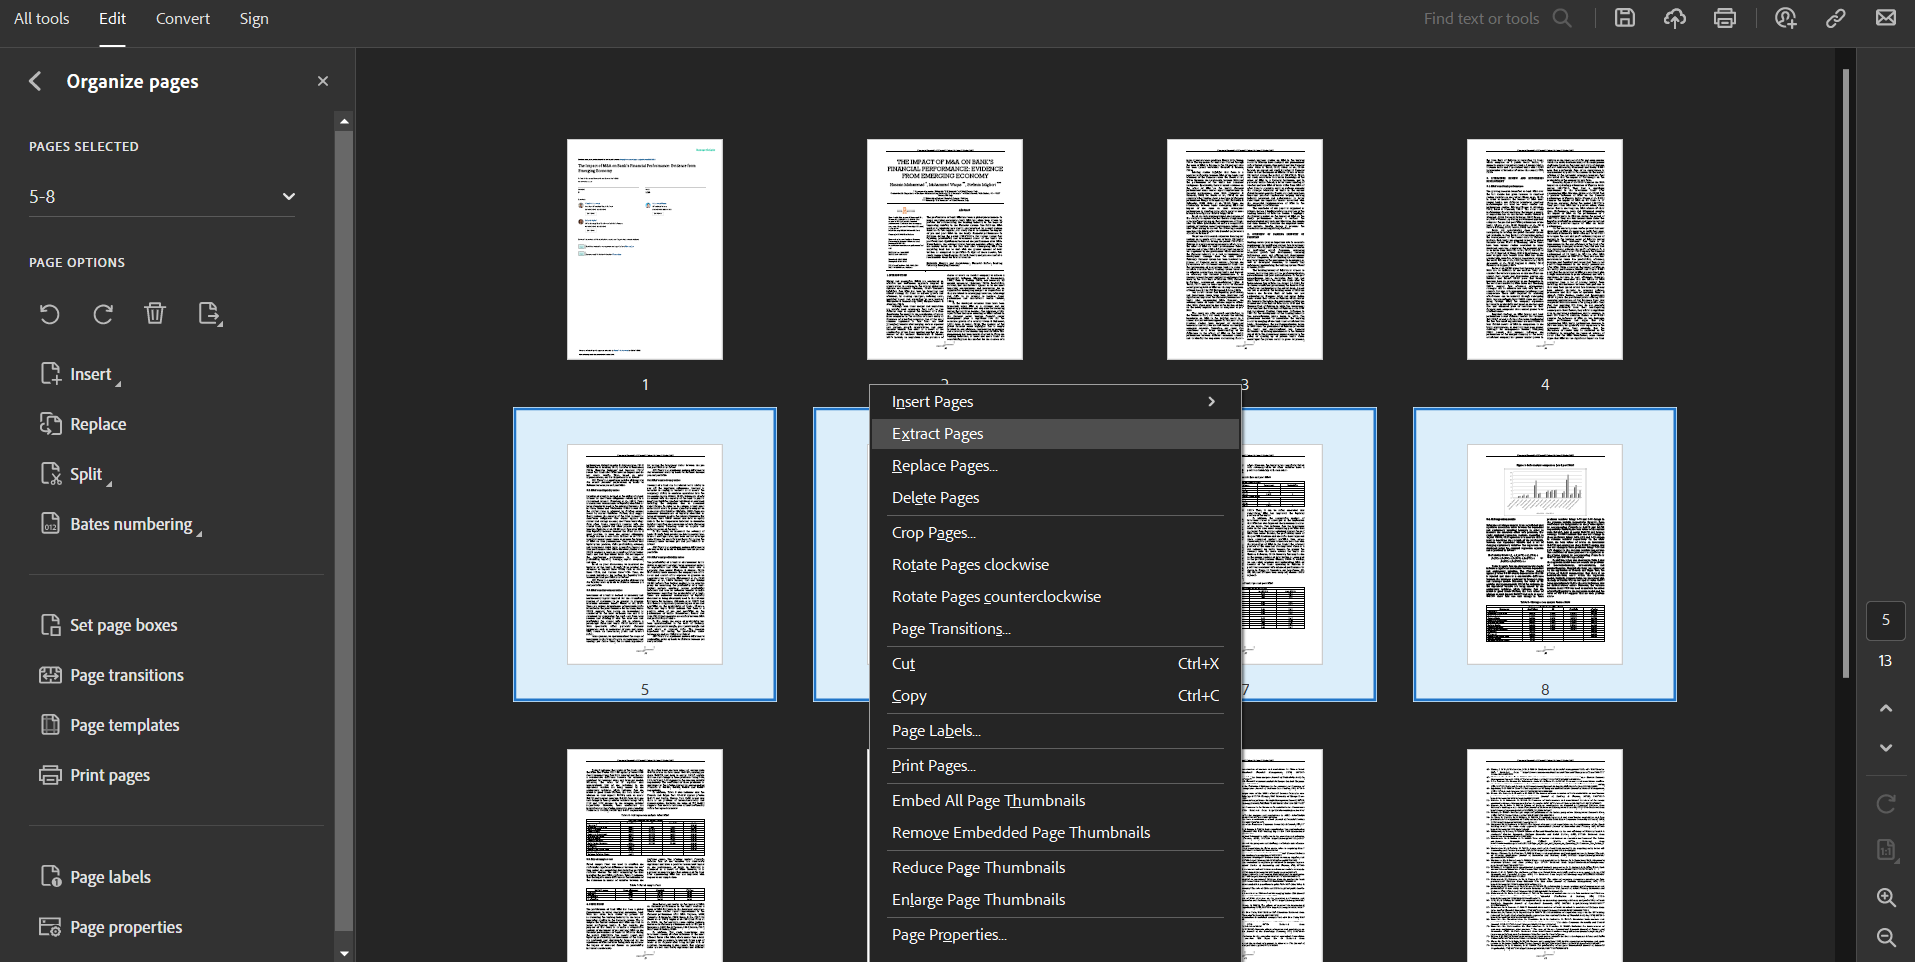 How to extract pages from PDFs using Adobe Acrobat Pro